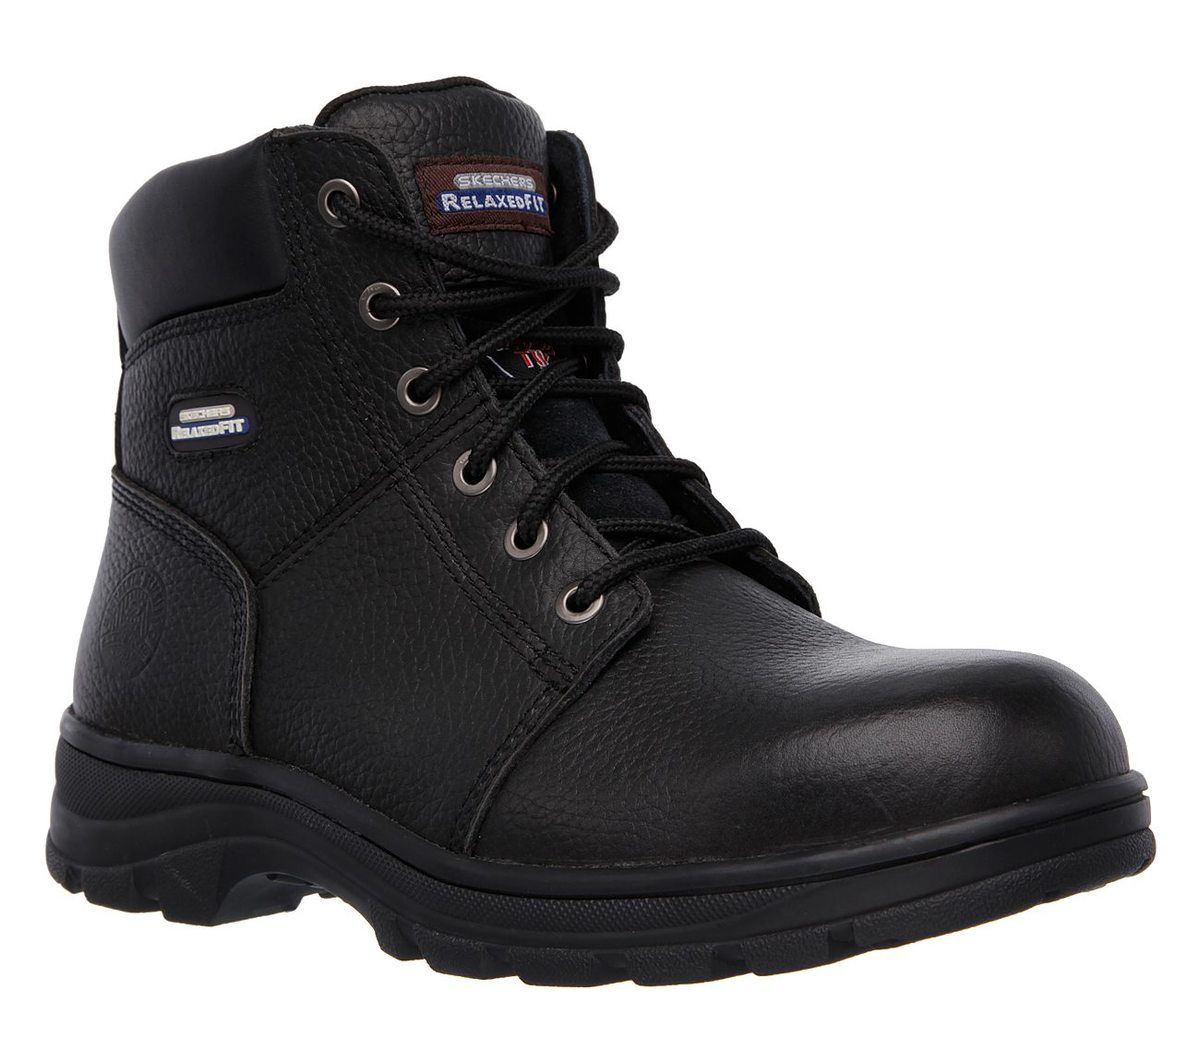 skechers safety shoes indonesia